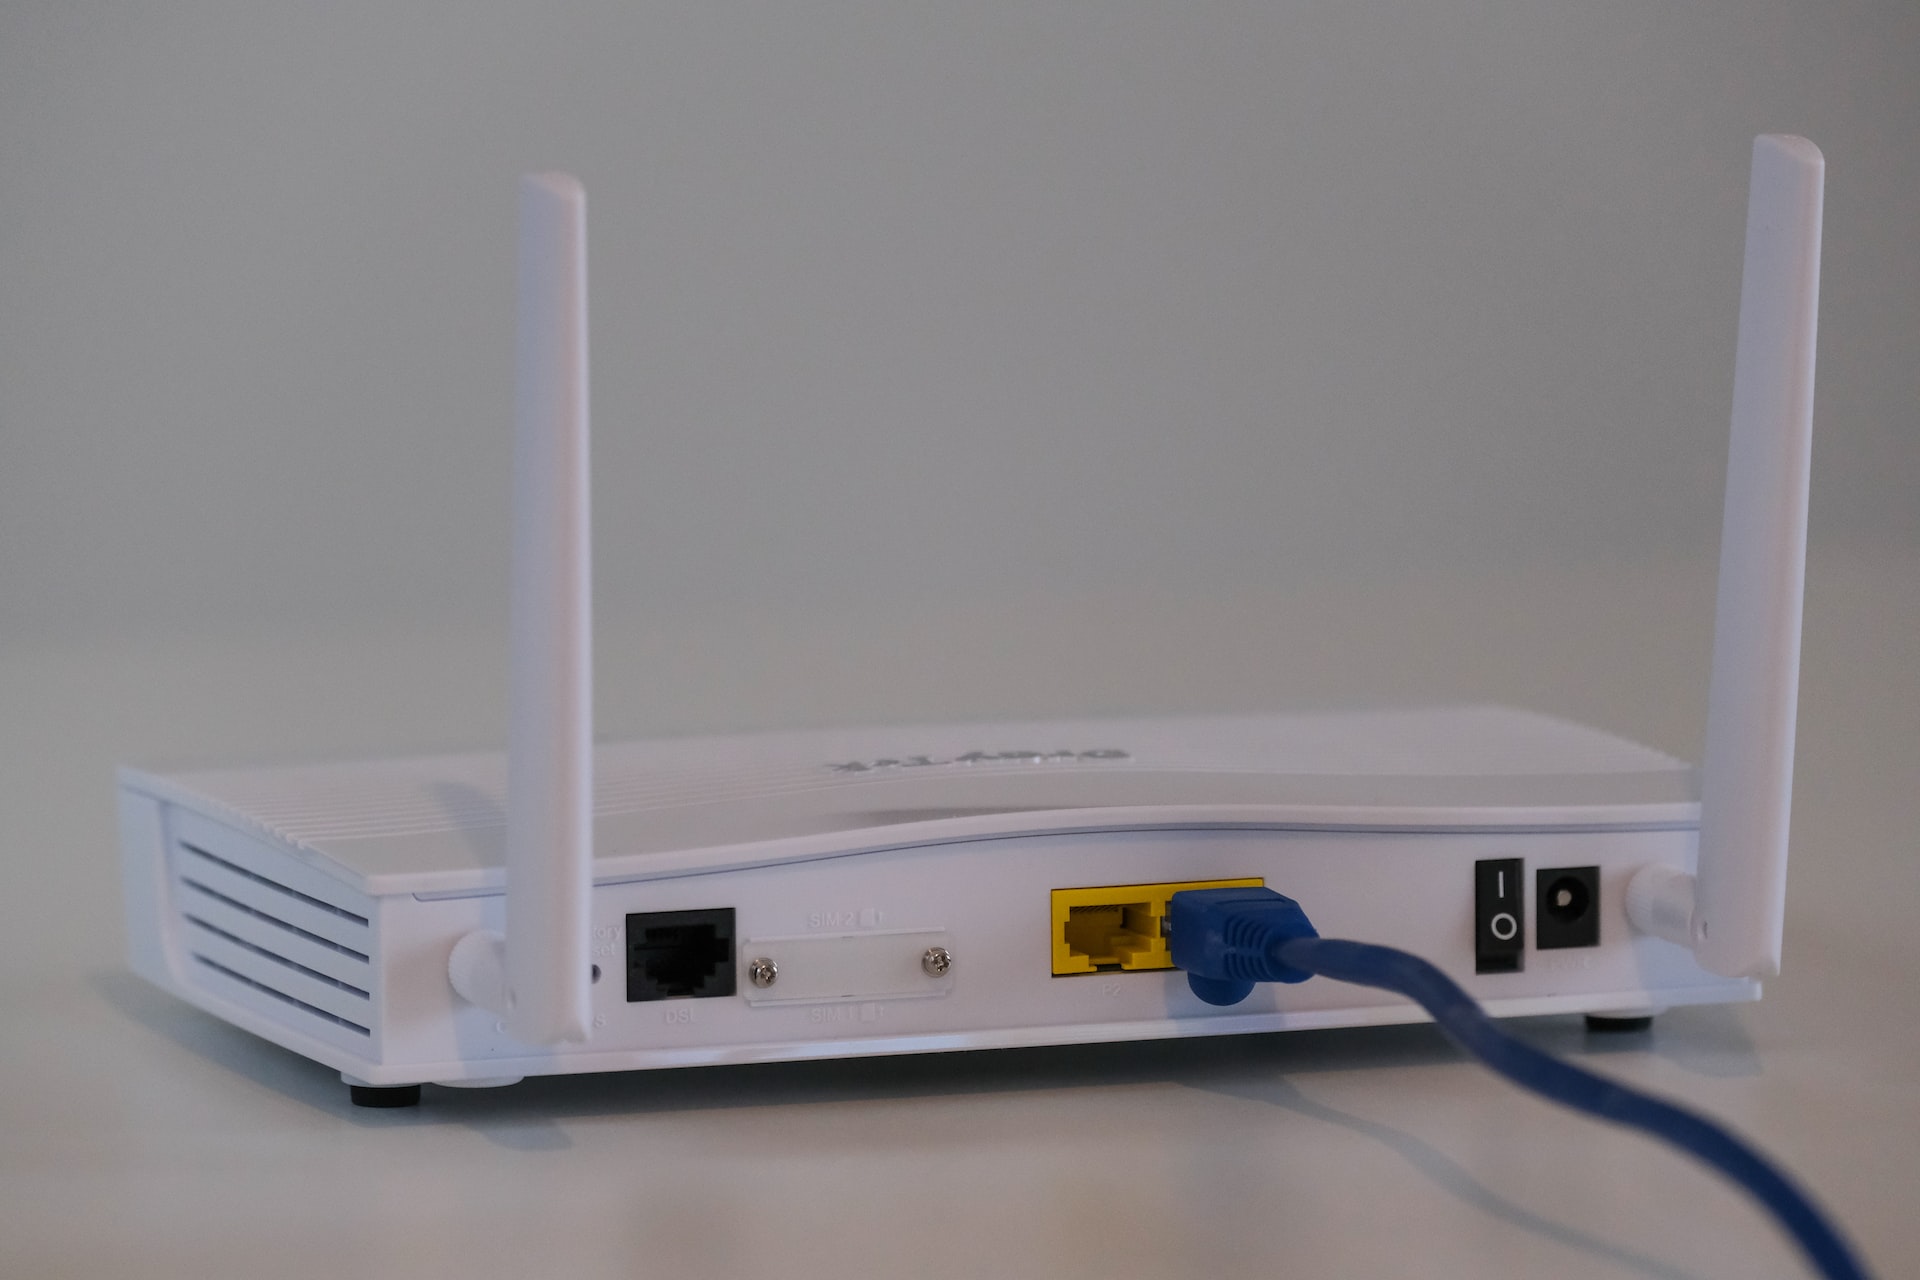 How to Find the Network Security Key for Your Router